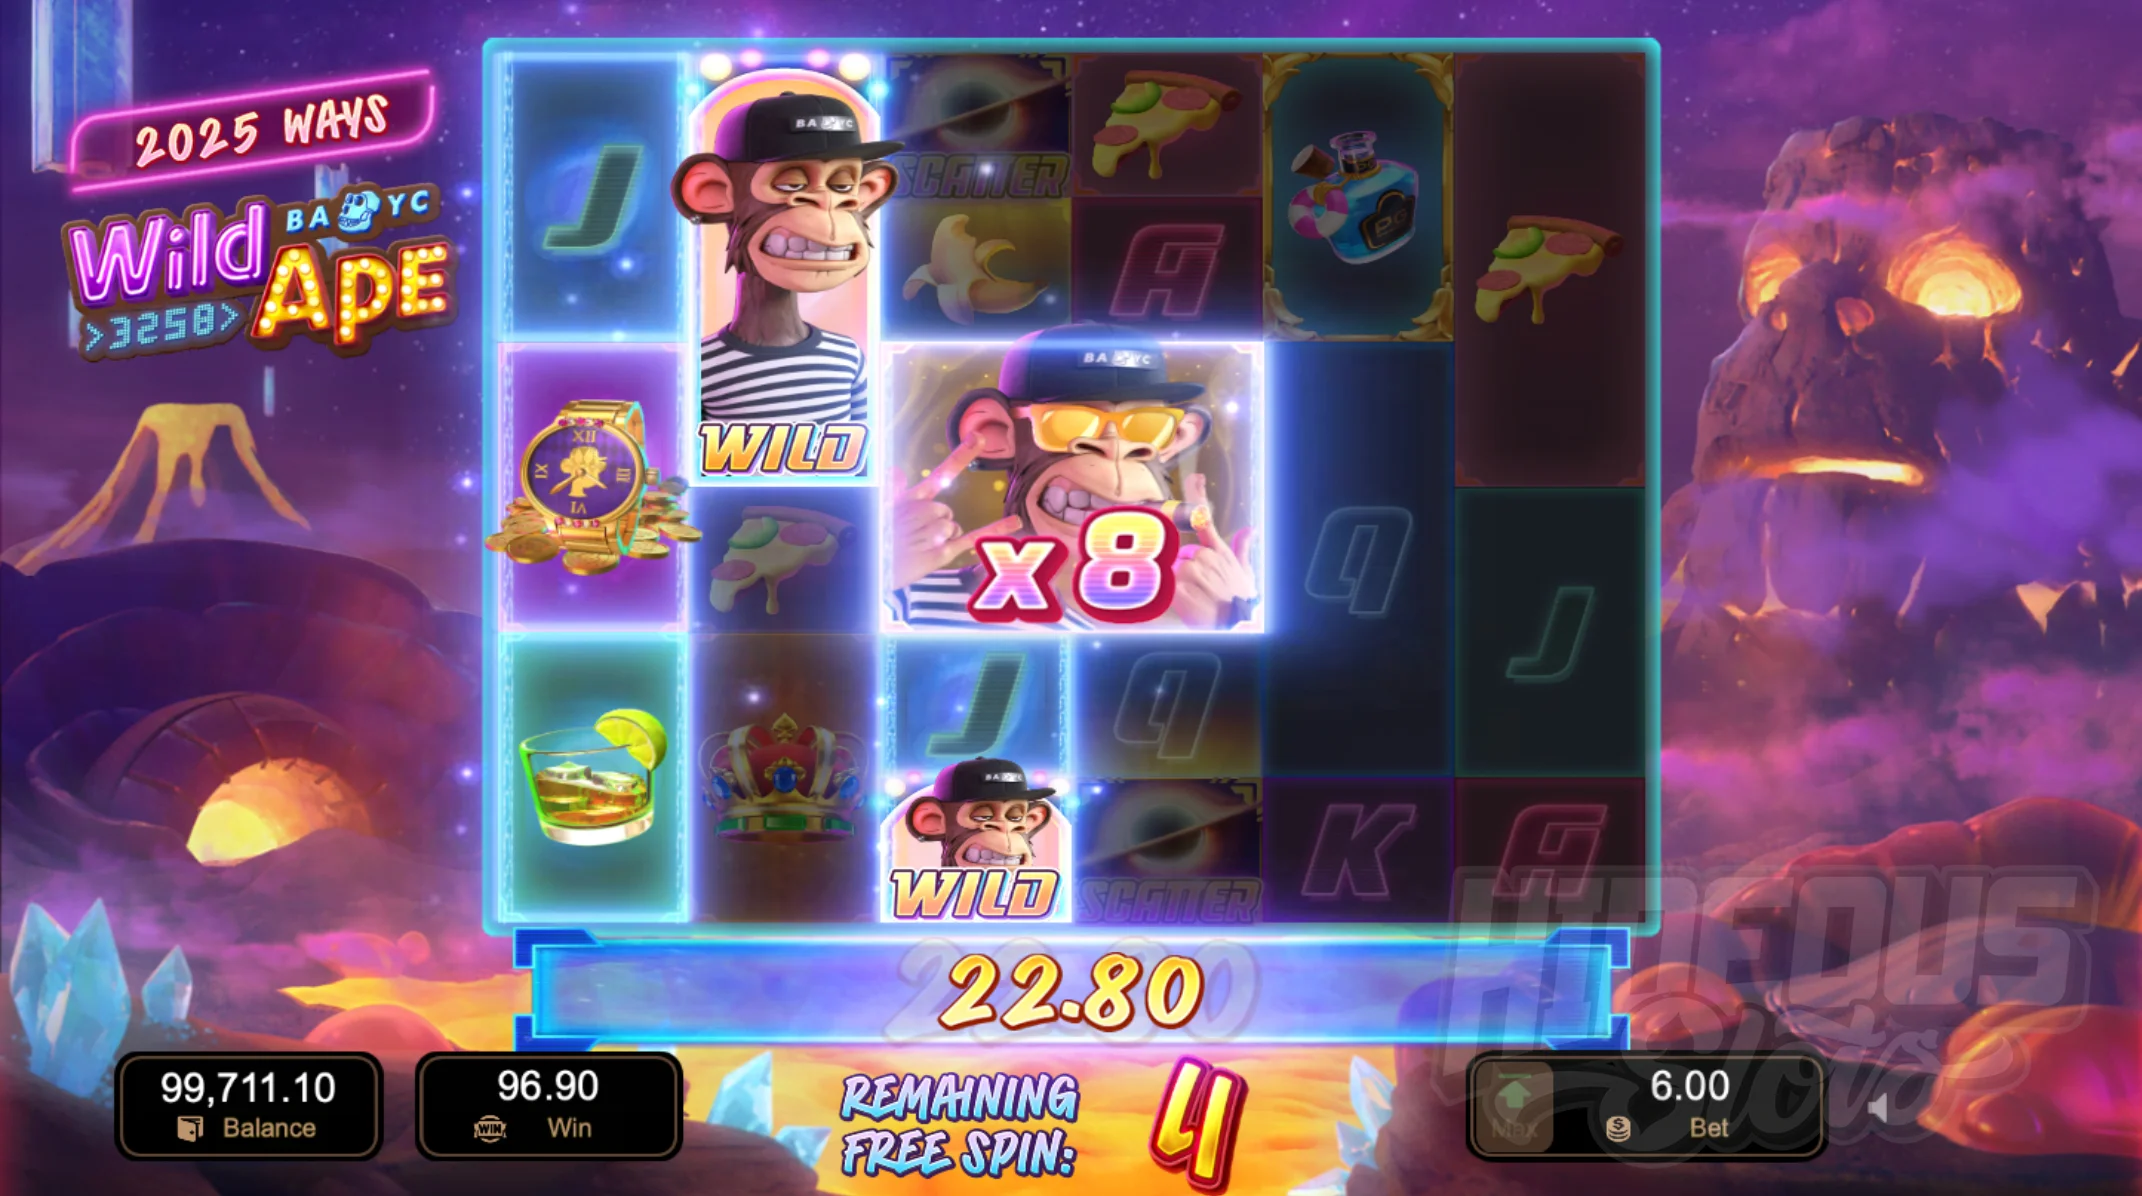 Wild Ape Symbols are Always Active During Free Spins